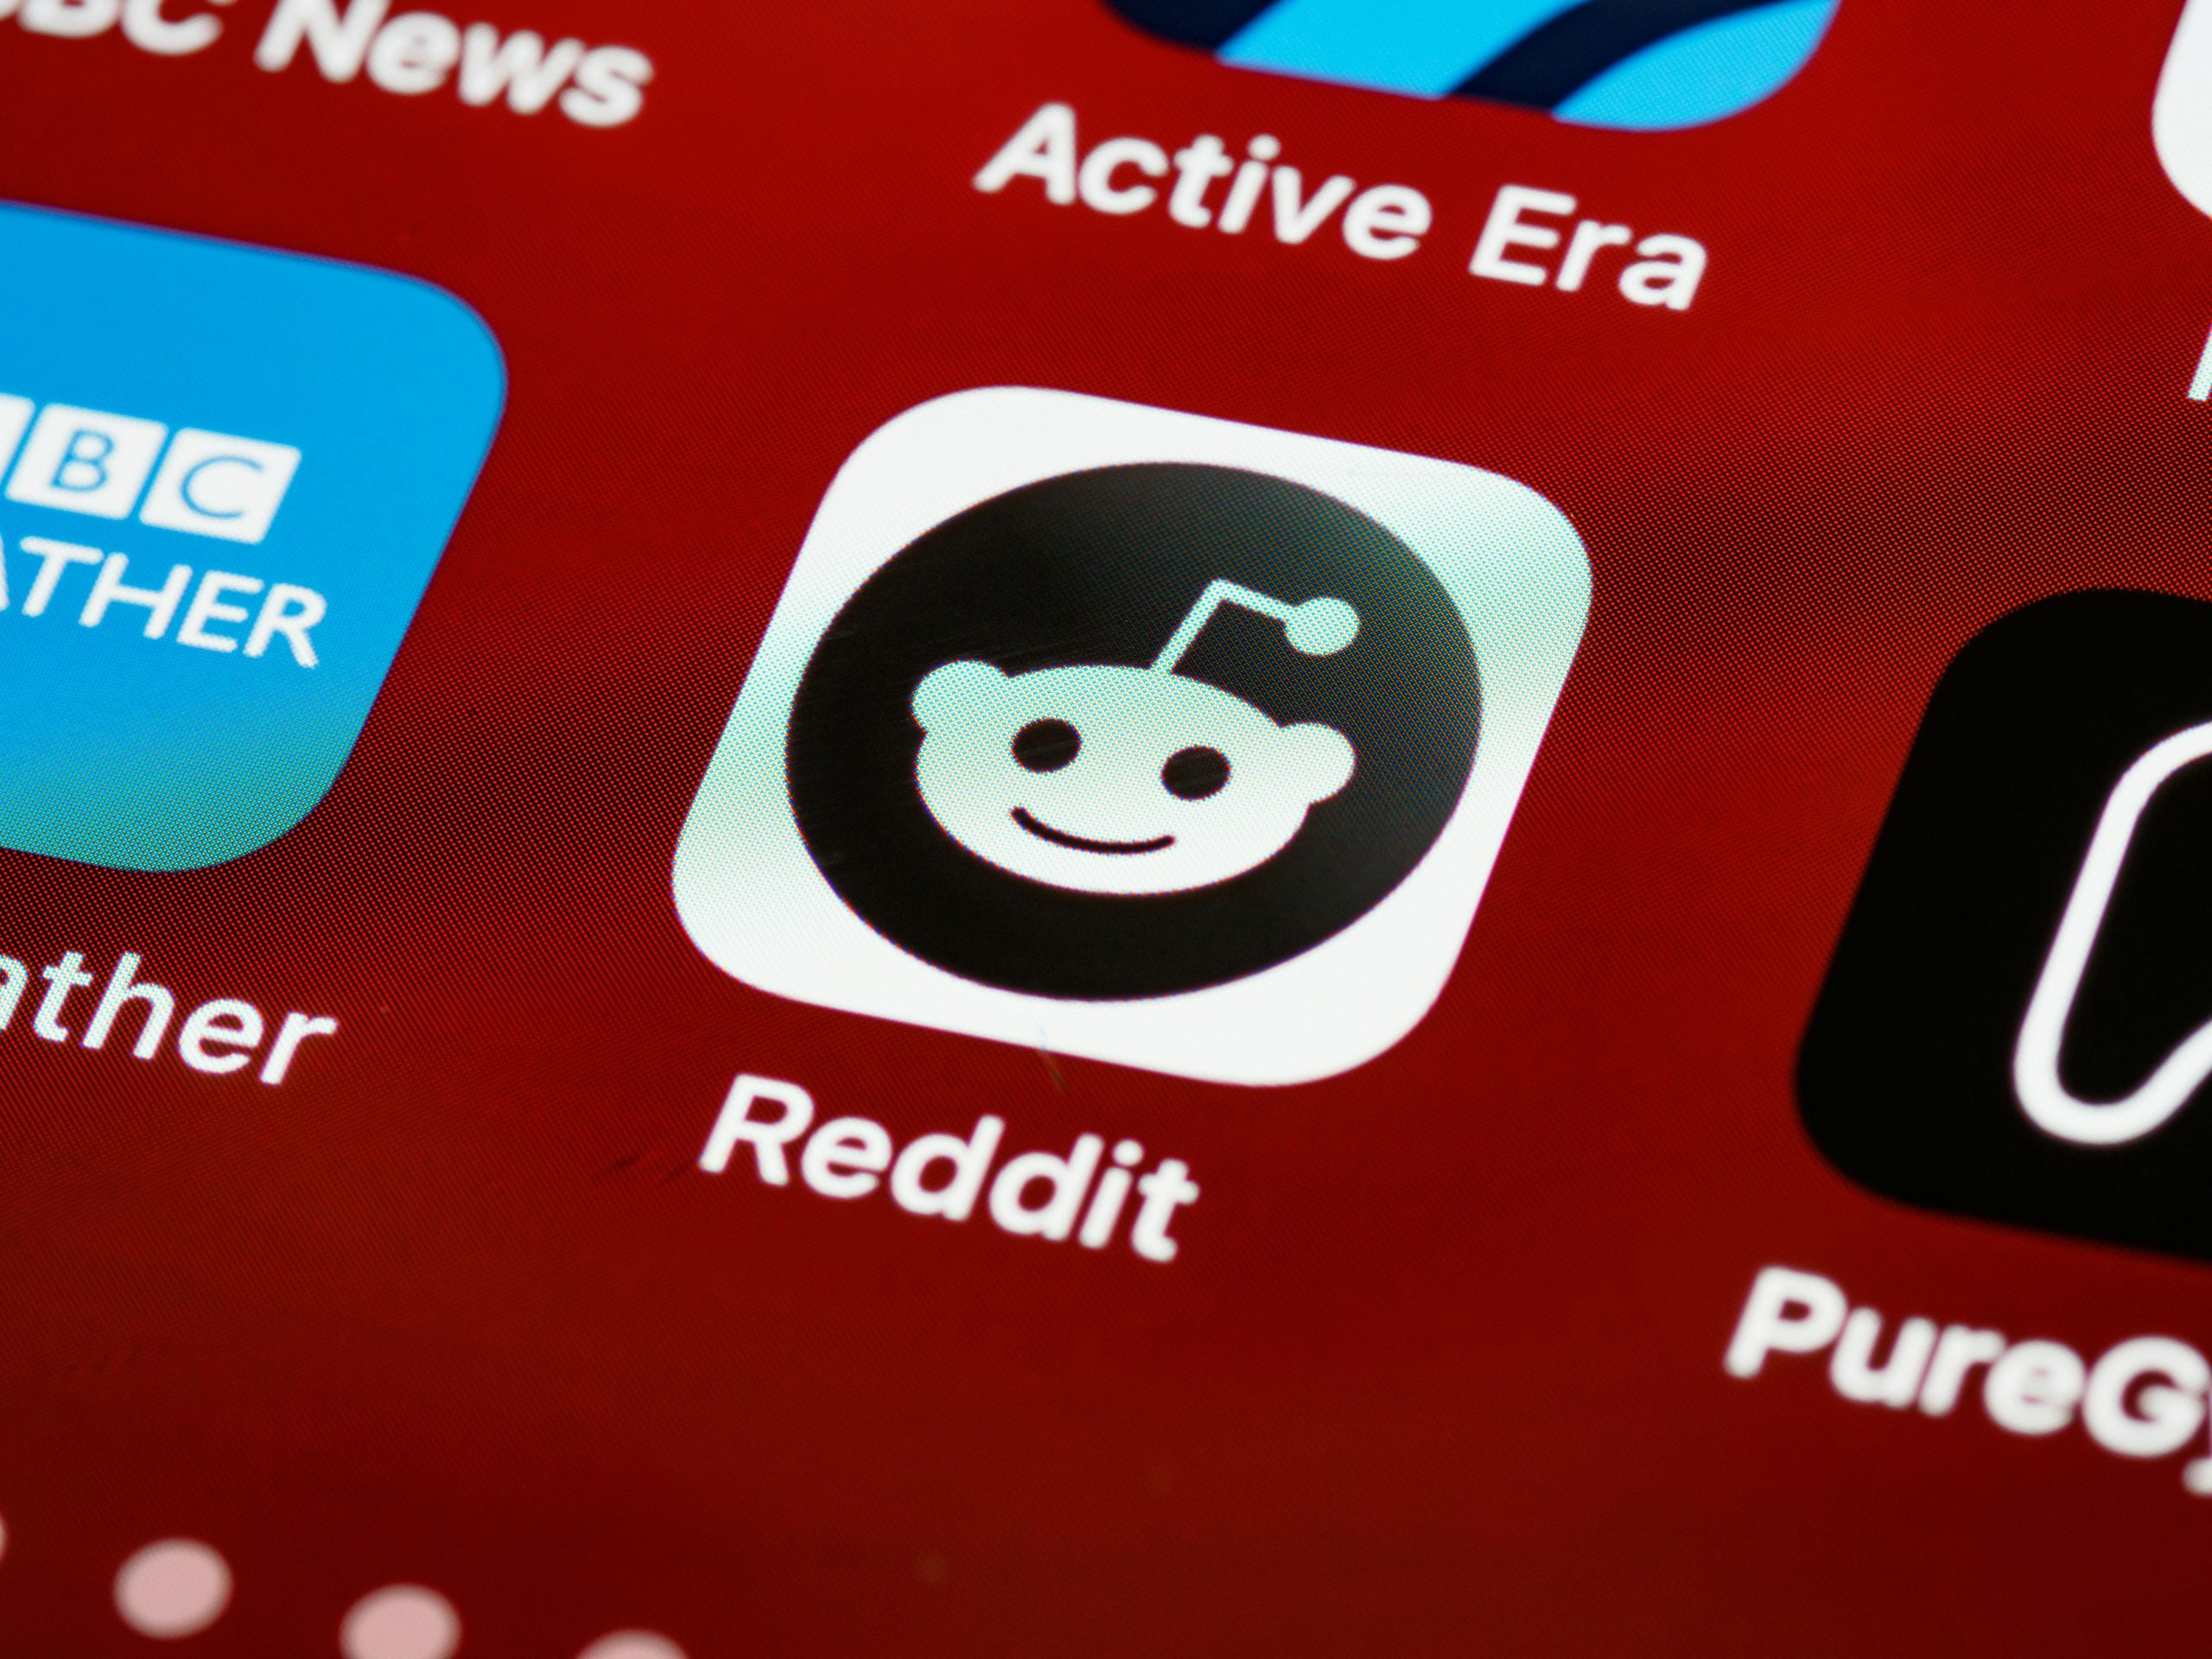 Reddit reportedly signs $60million annual deal with AI company